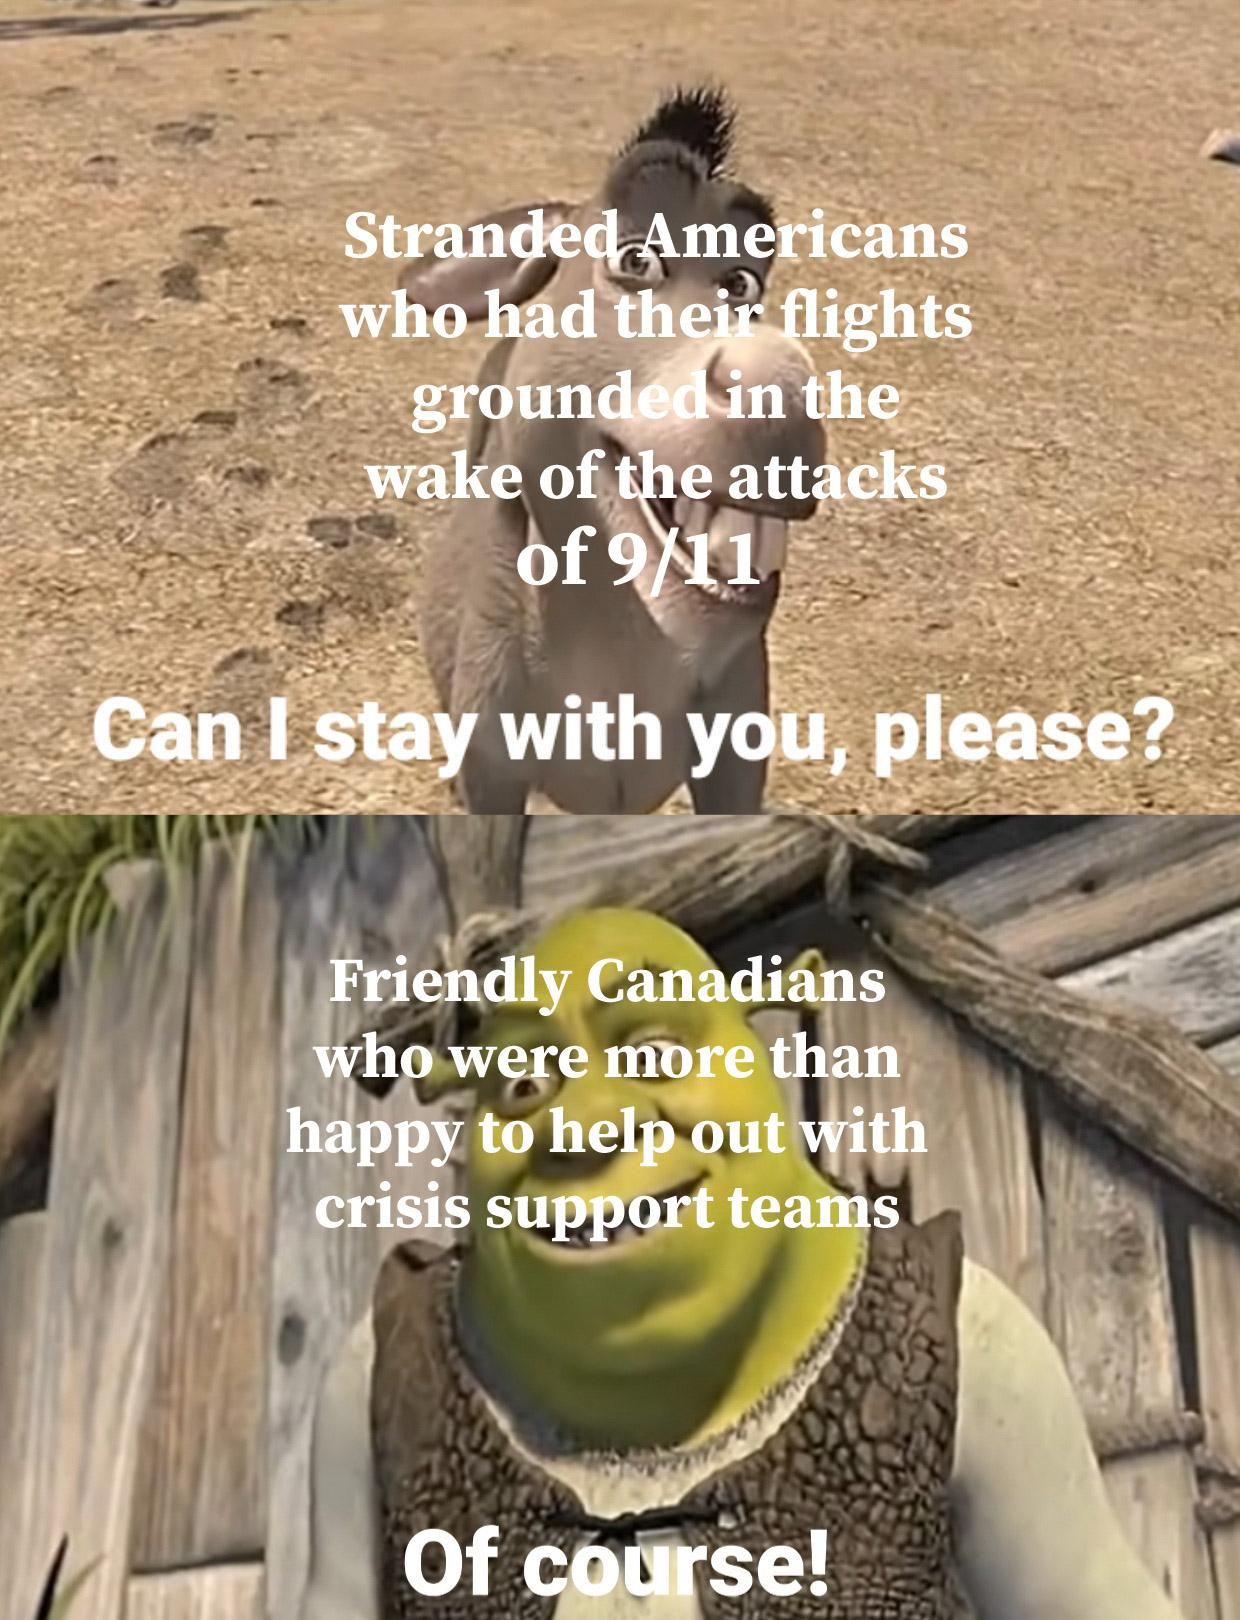 One of the few wholesome things to happen on 9/11. Thanks, friendly Canadians!